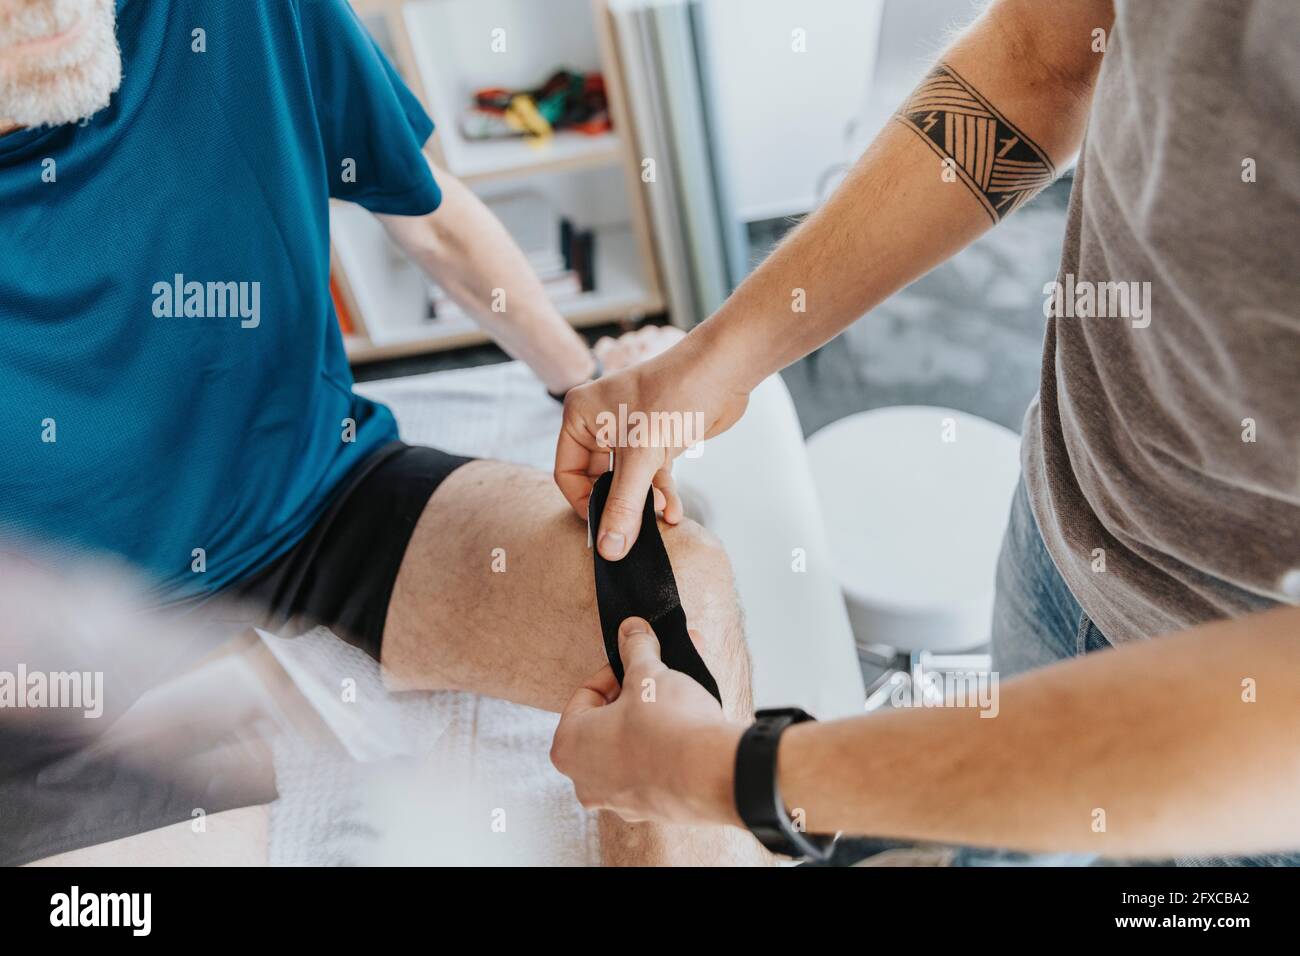 Male physiotherapist sticking elastic therapeutic tape on knee of patient Stock Photo